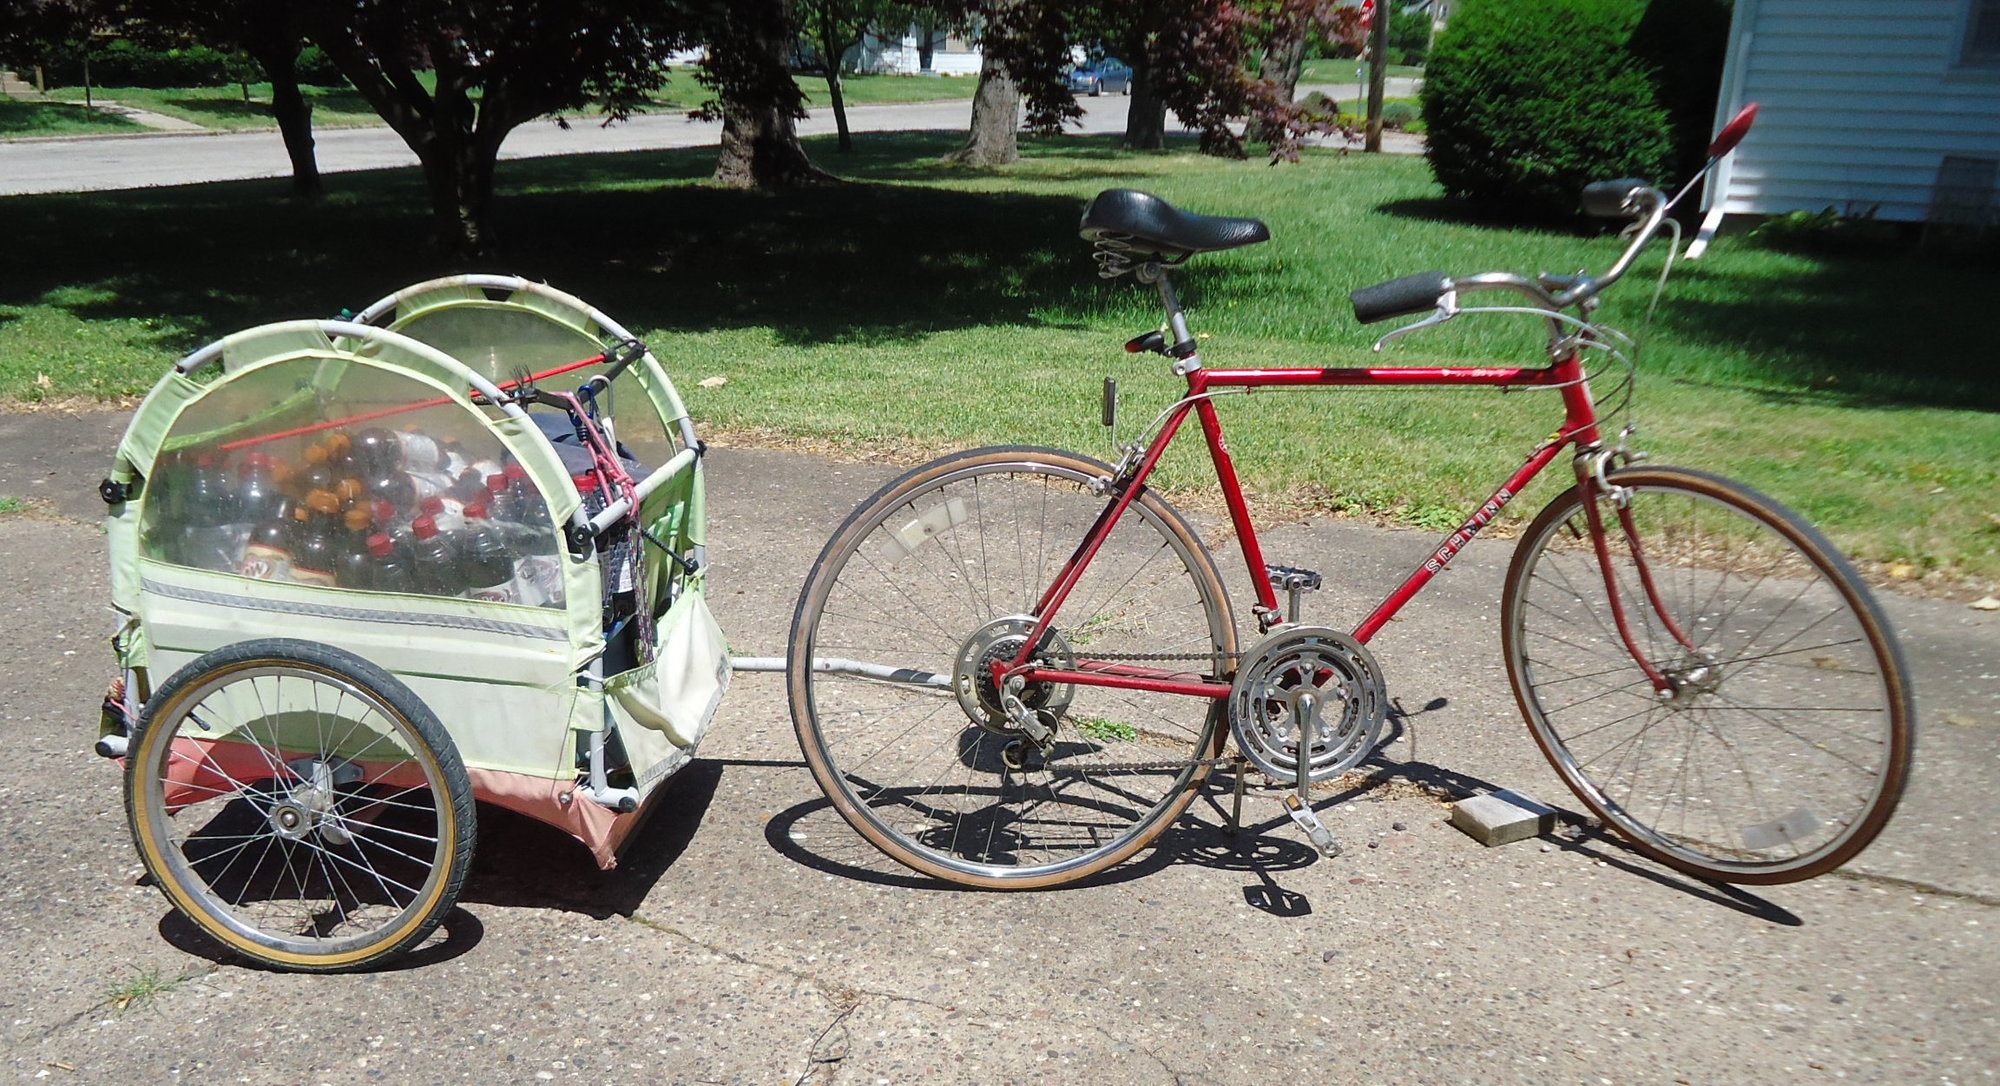 My $10 Vintage Schwinn find and I want to learn how to rebuild and